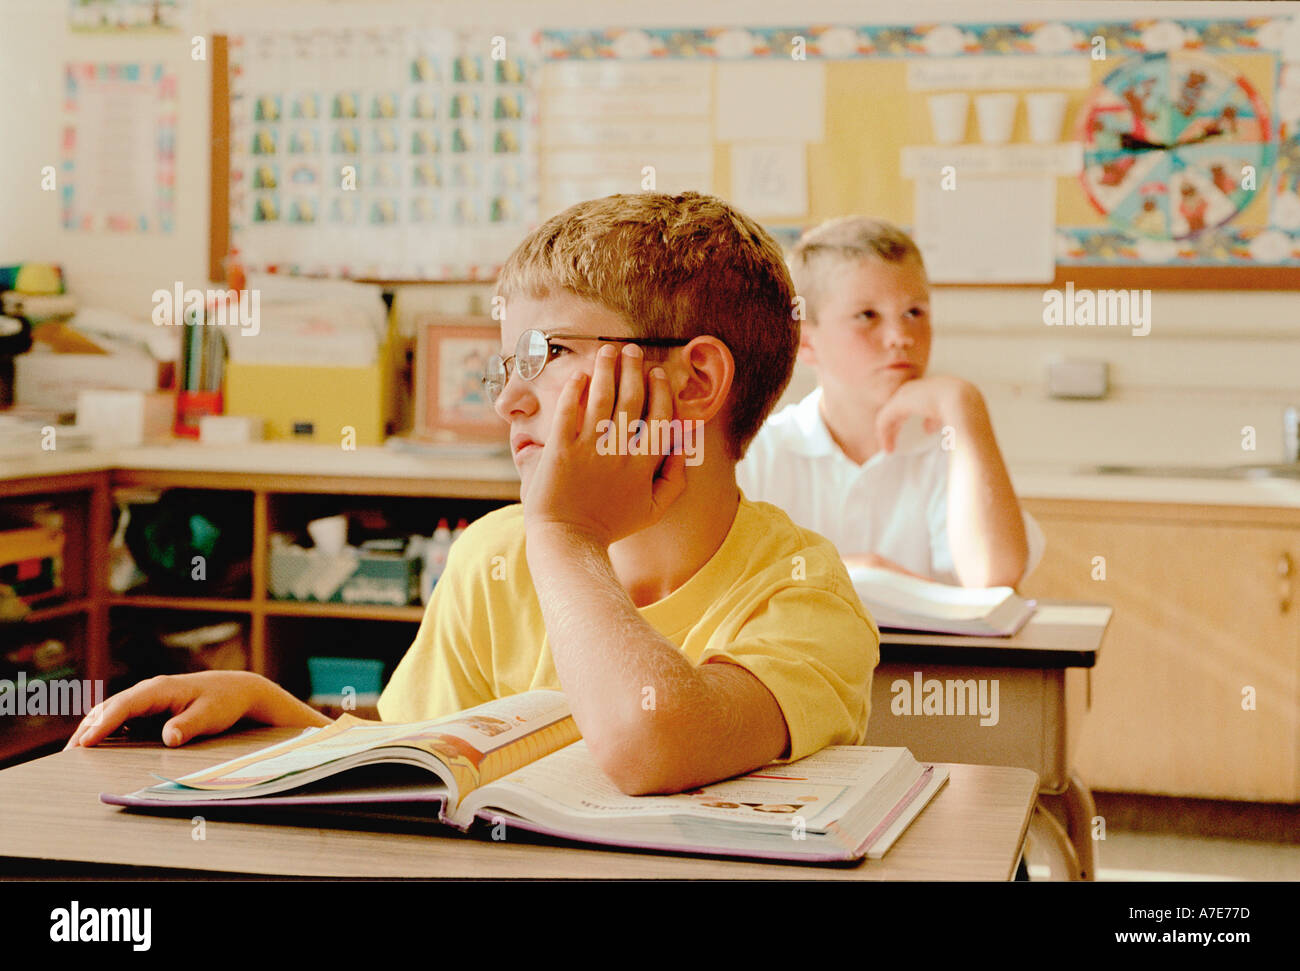 Schoolboy daydreaming in class Stock Photo